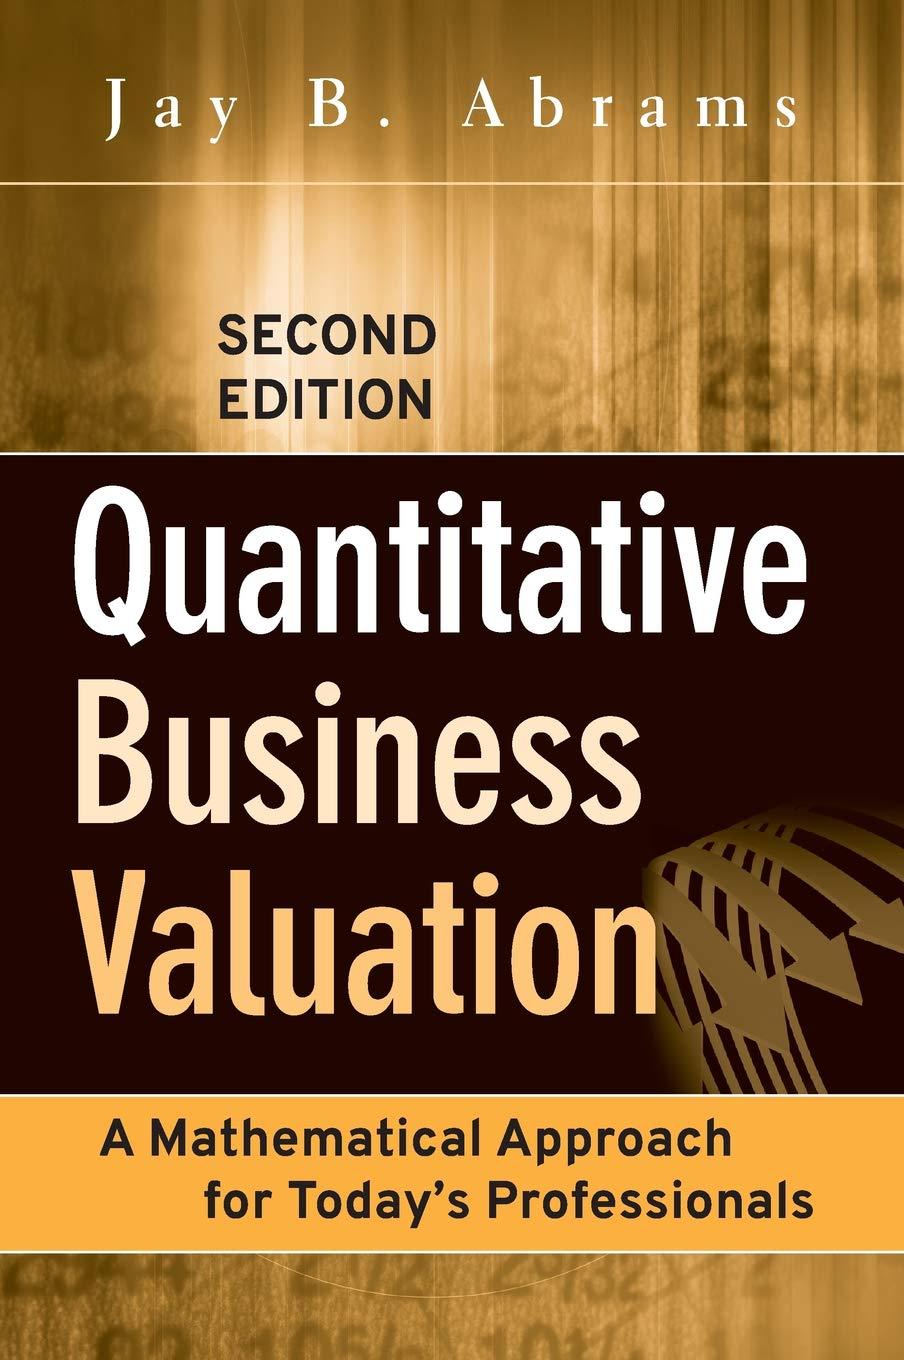 quantitative business valuation a mathematical approach for todays professionals 2nd edition jay b. abrams